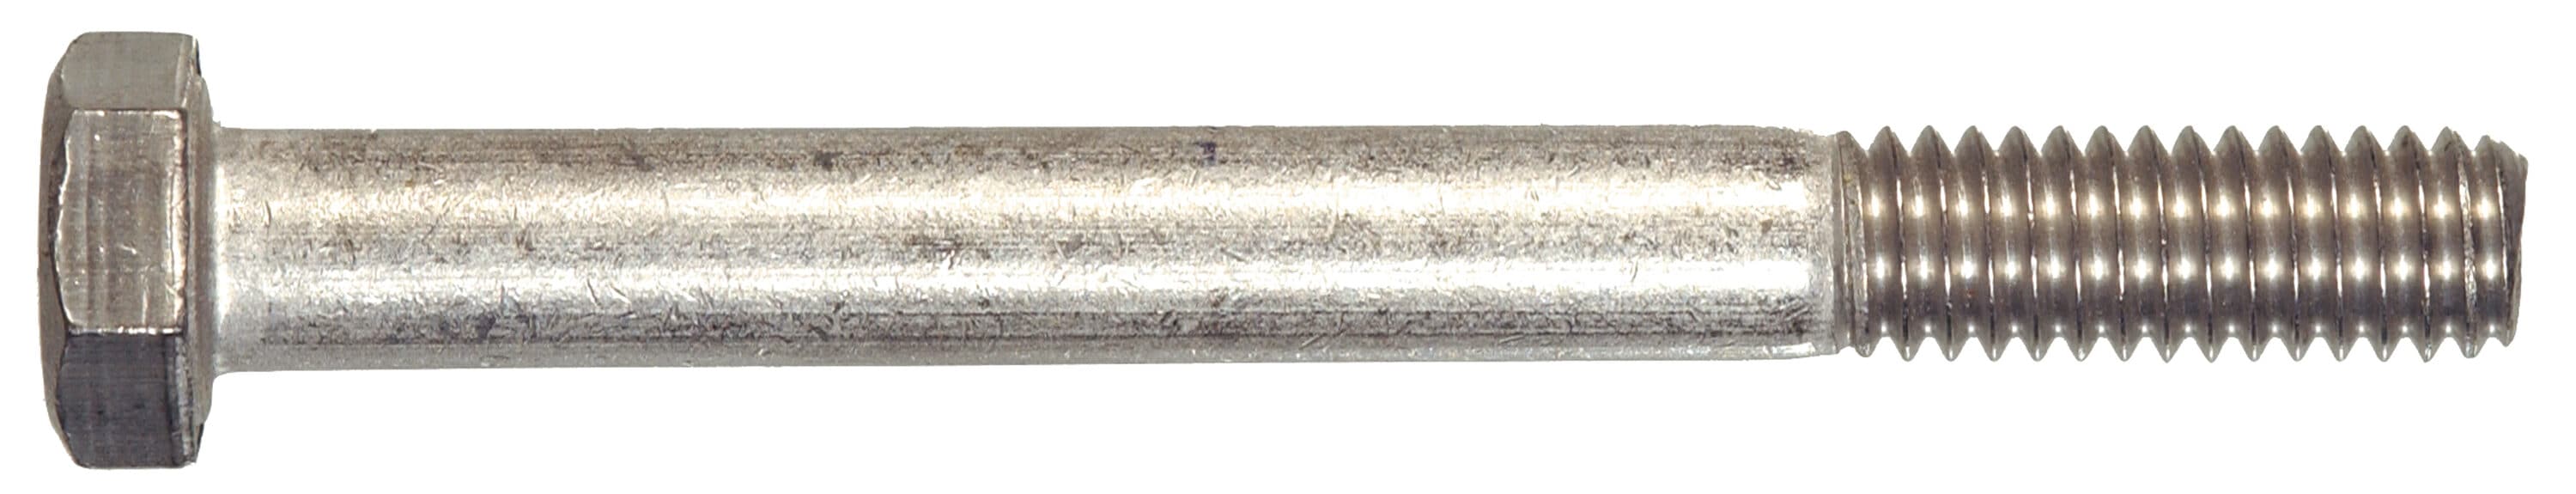 Hillman 14 In X 1 12 In Stainless Coarse Thread Hex Bolt 2 Count In The Hex Bolts Department